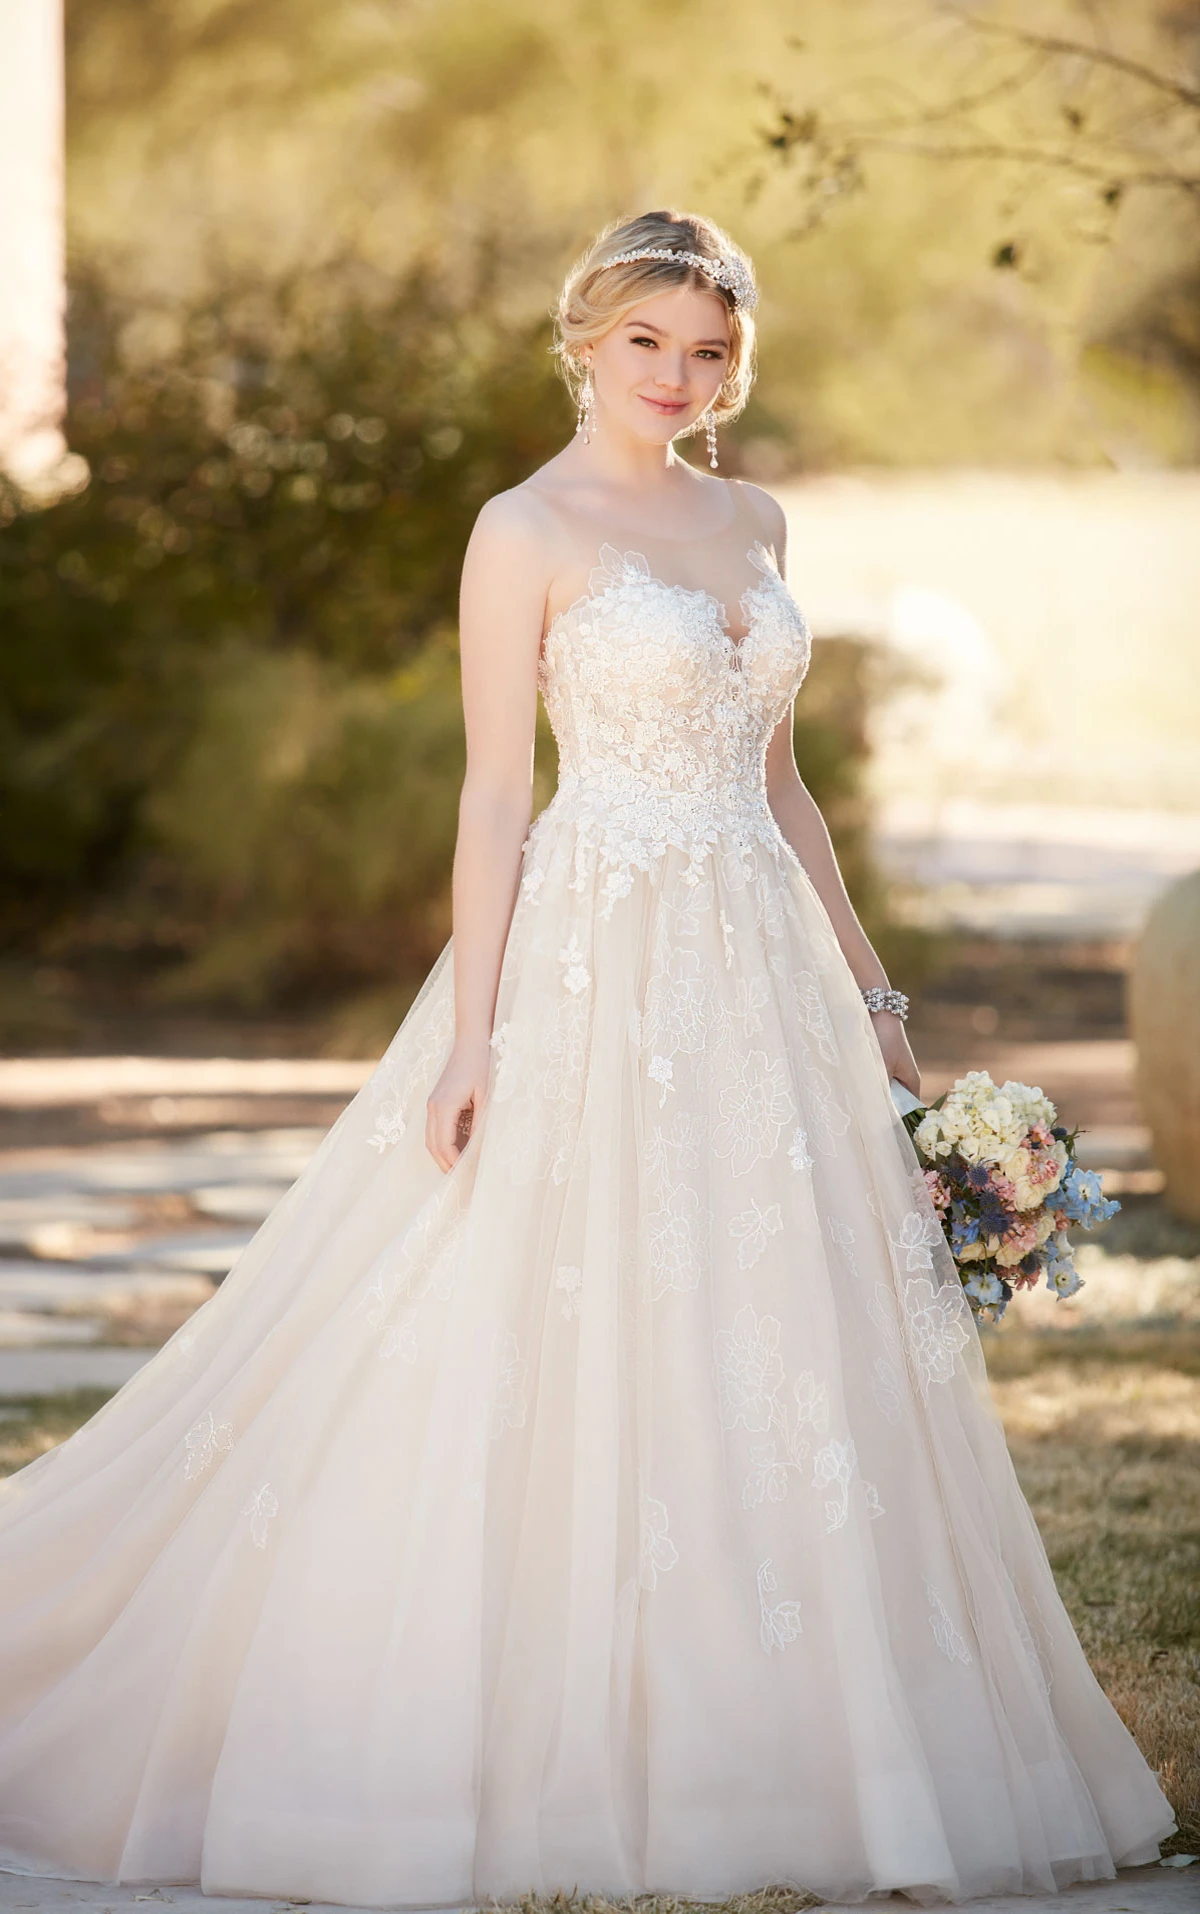 Ball Gown Wedding Dress with Tulle Skirt | Essense of ...